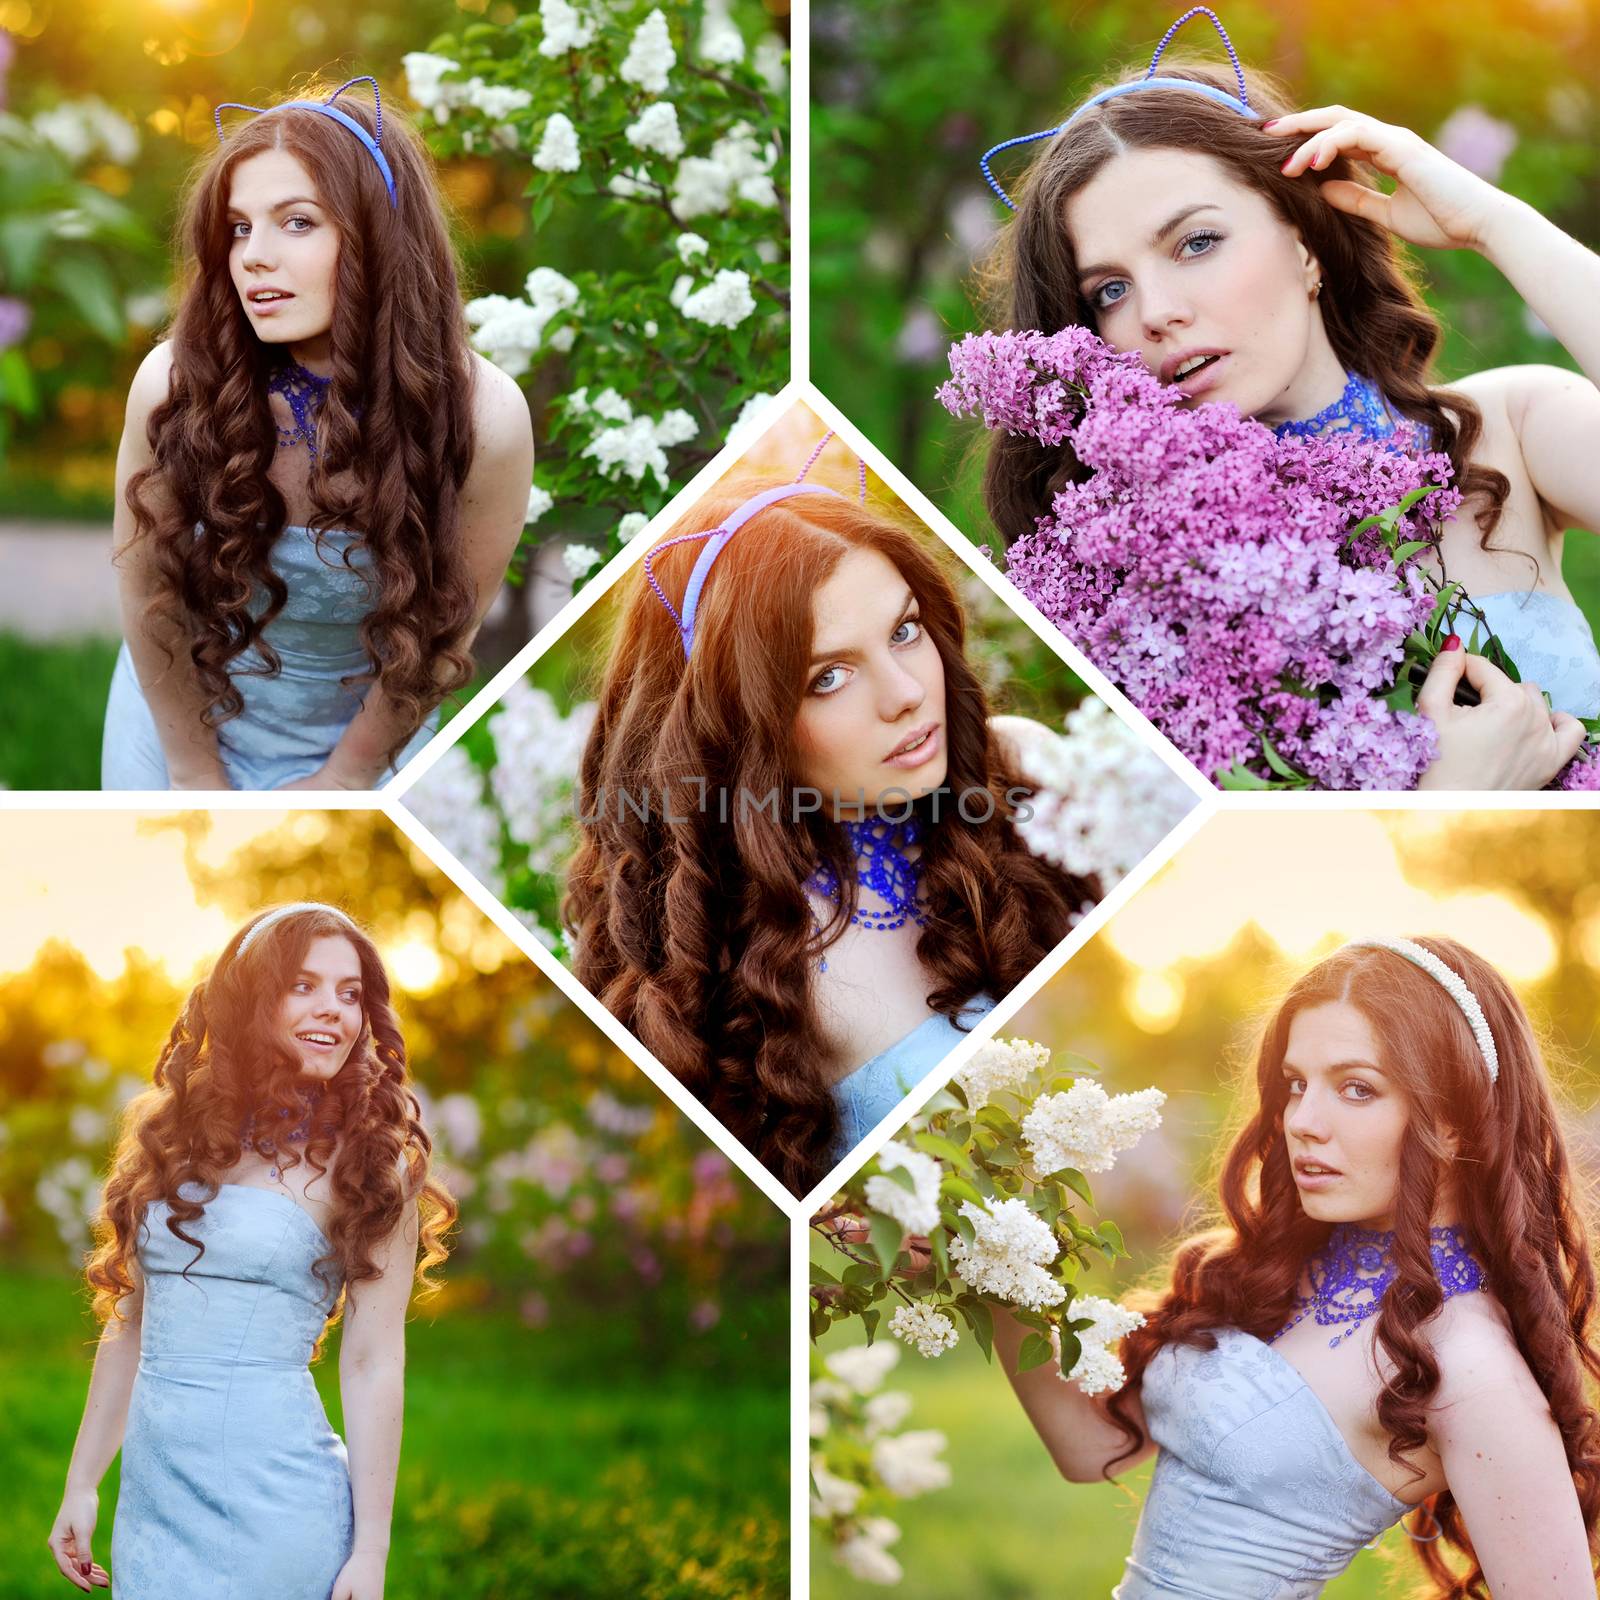 Collage of beautiful girl in spring garden with lilac flowers.